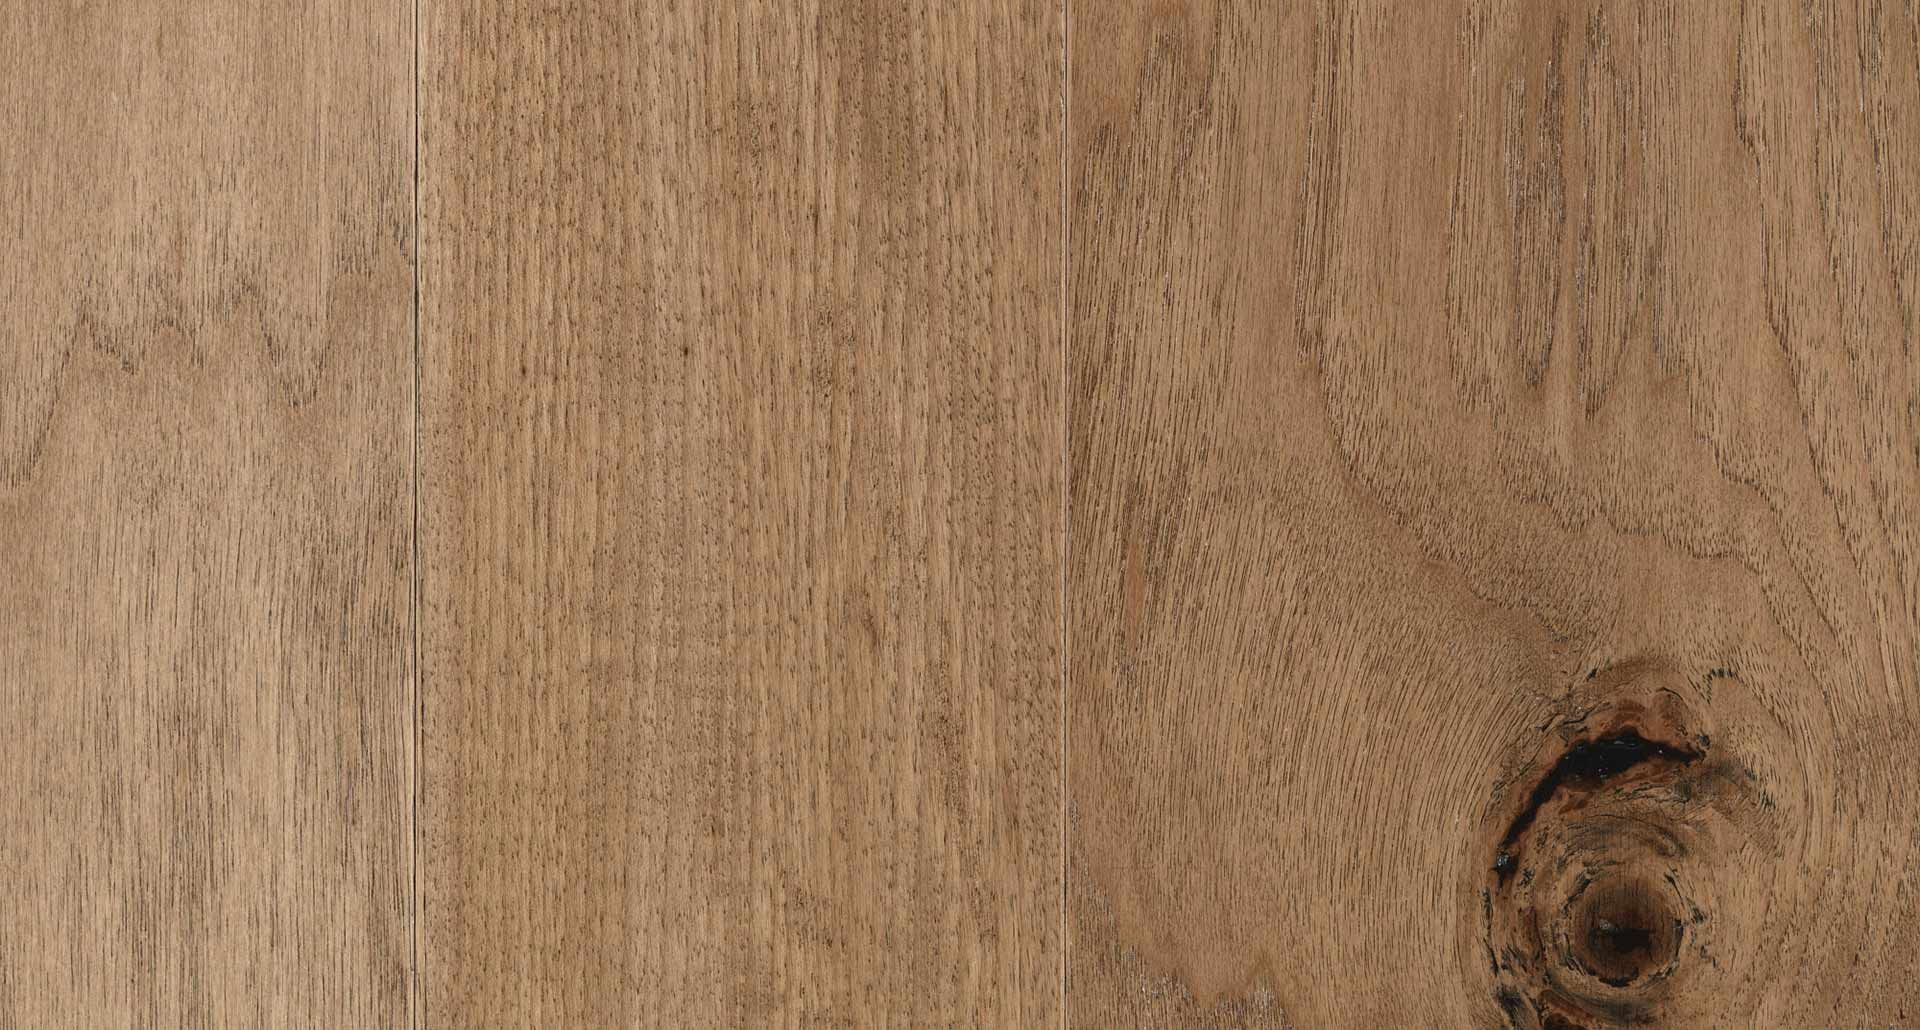 28 Fantastic Hickory Hardwood Flooring Prices 2024 free download hickory hardwood flooring prices of falls river hickory wire brushed engineered hardwood floor golden in falls river hickory wire brushed engineered hardwood floor golden hickory wood finish